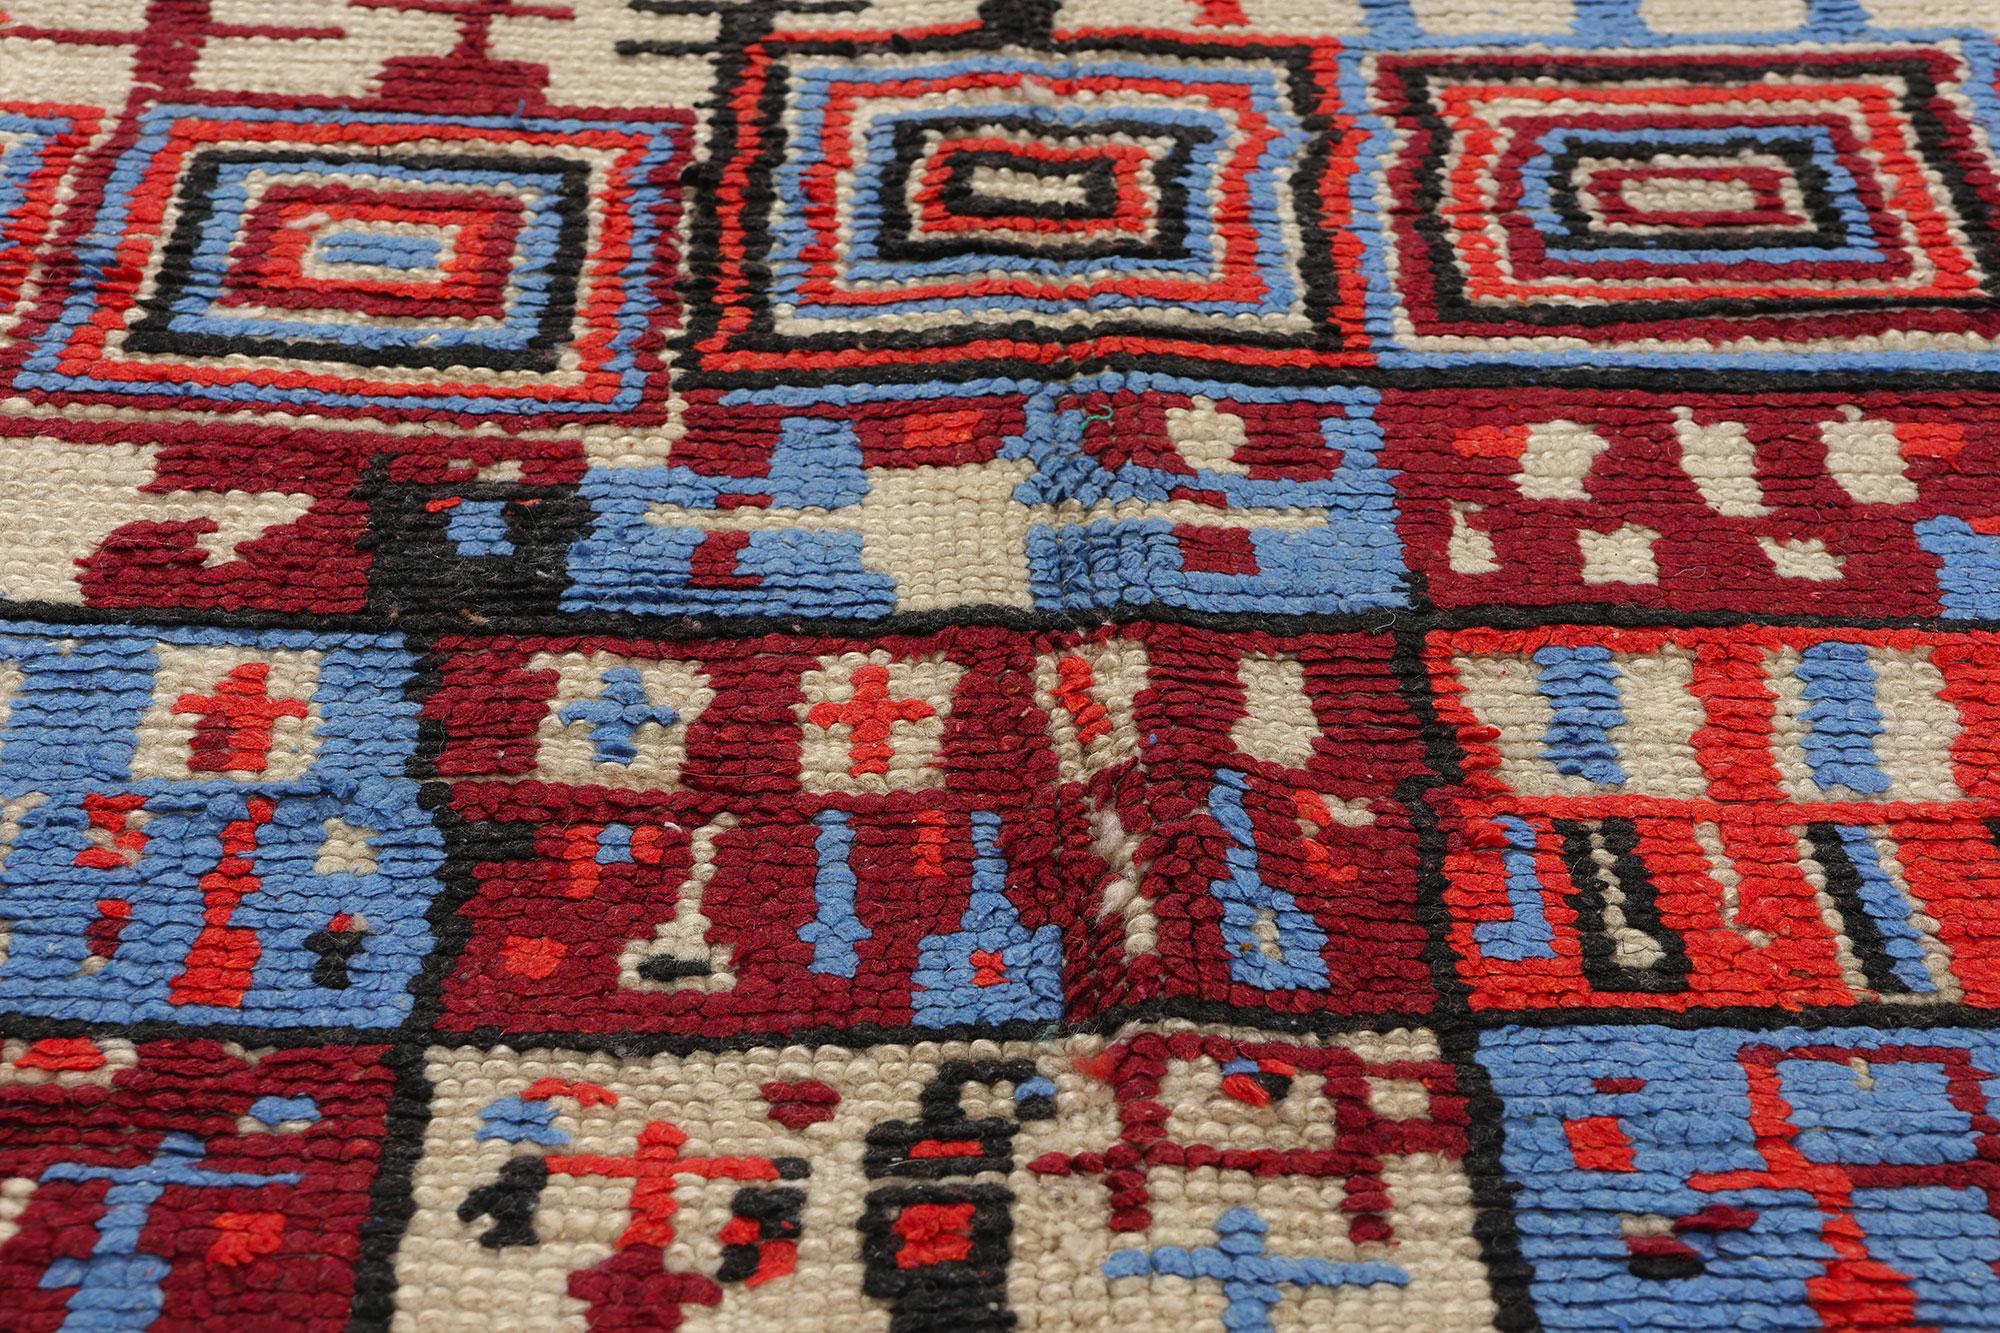 Vintage Checkered Moroccan Azilal Rug, Maximalist Boho Meets Cubism In Good Condition For Sale In Dallas, TX